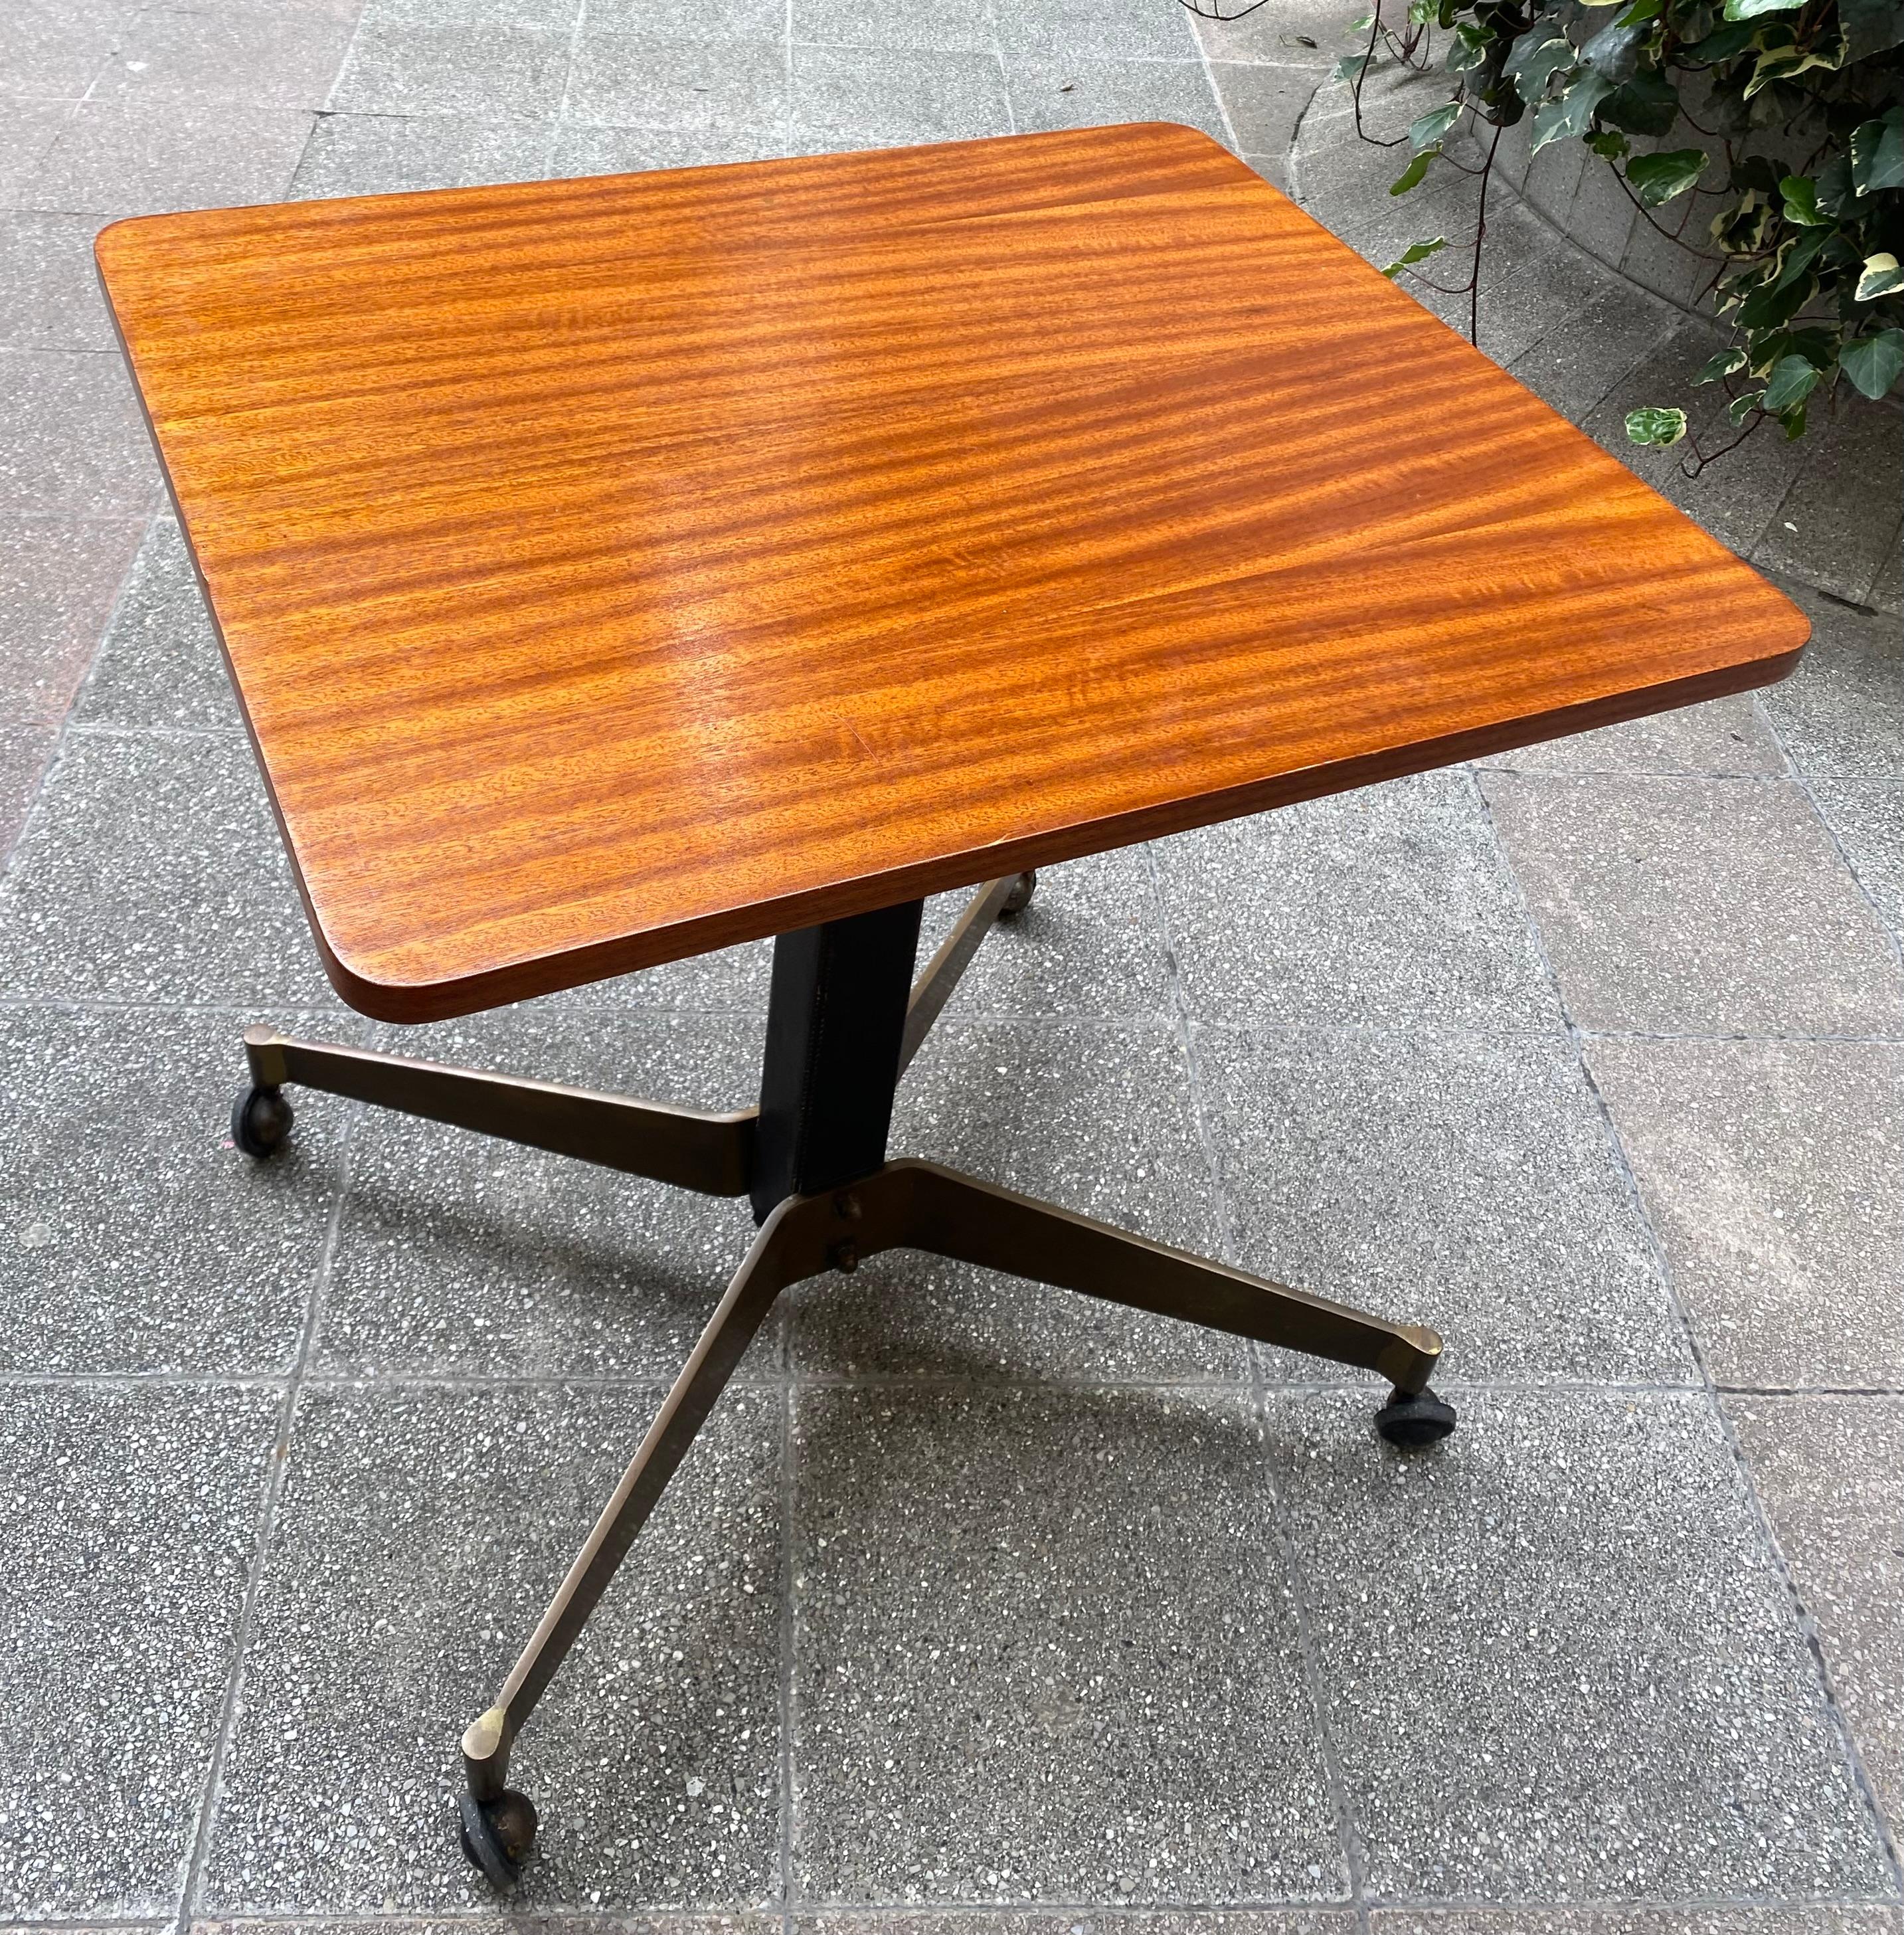 Jacques Adnet
Rosewood pedestal table - 1950s
Rosewood top and black metal base
Castors on each leather and brass feet
Leather and brass

Dimensions: L 65 x L 55 H 67 cm
In good vintage condition.